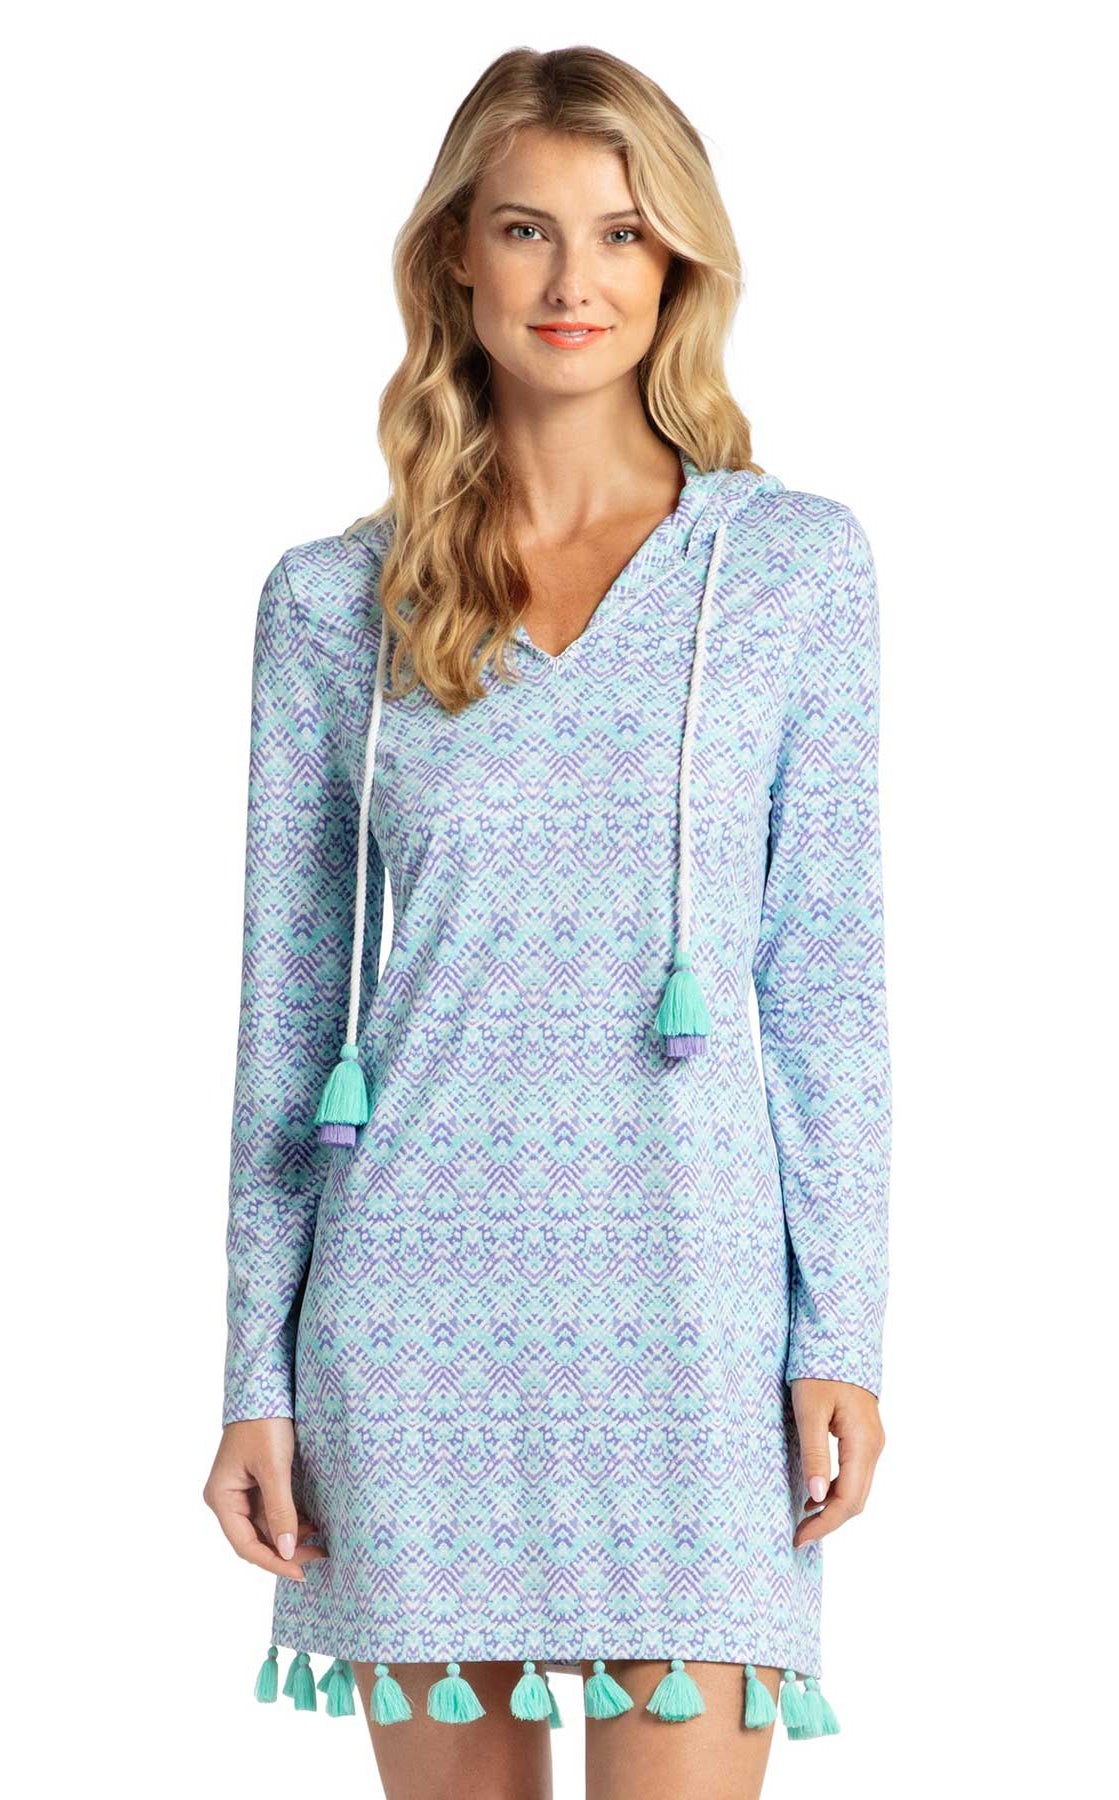 Cabana Life: Naples Hooded Cover Up